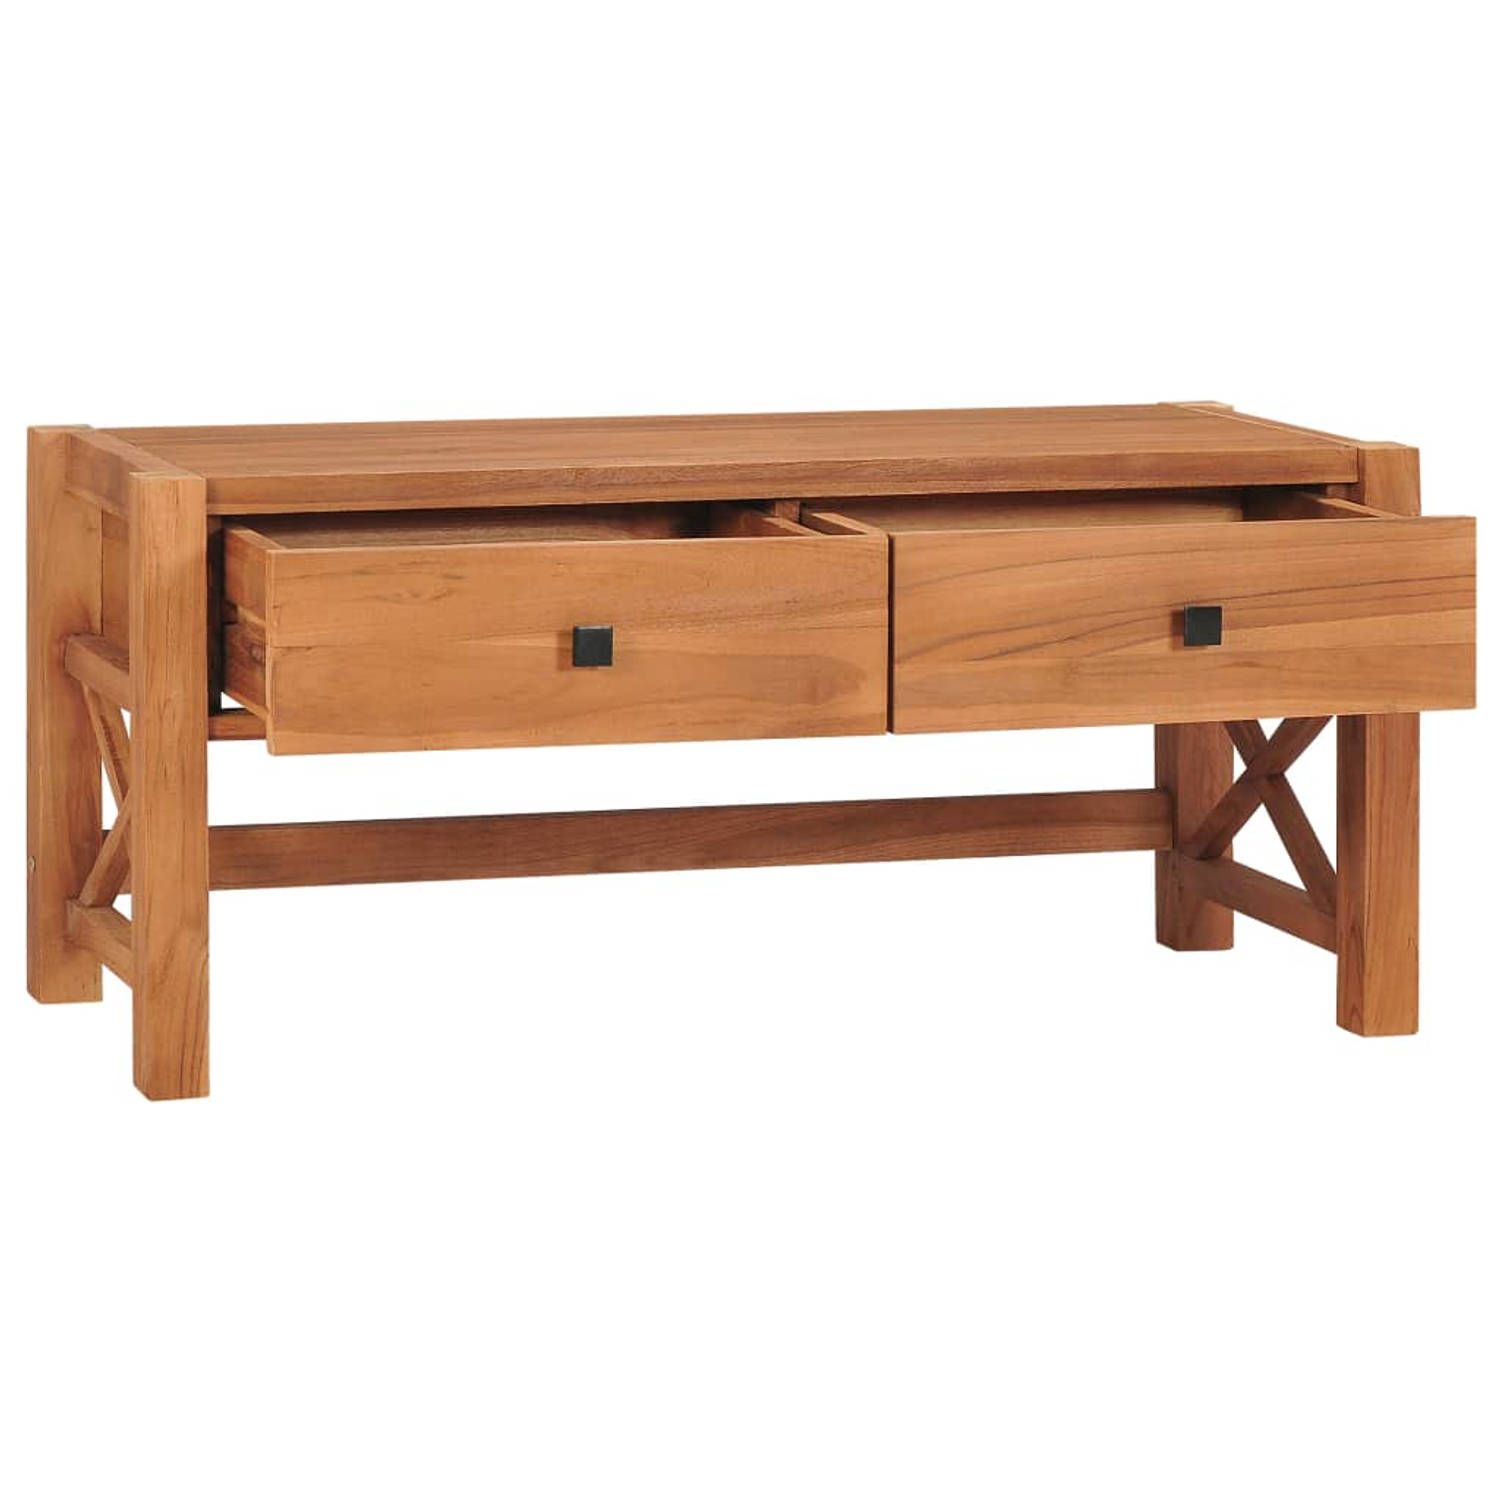 The Living Store Houten TV-meubel - Naturel - 100 x 40 x 45 cm - Gerecycled teakhout